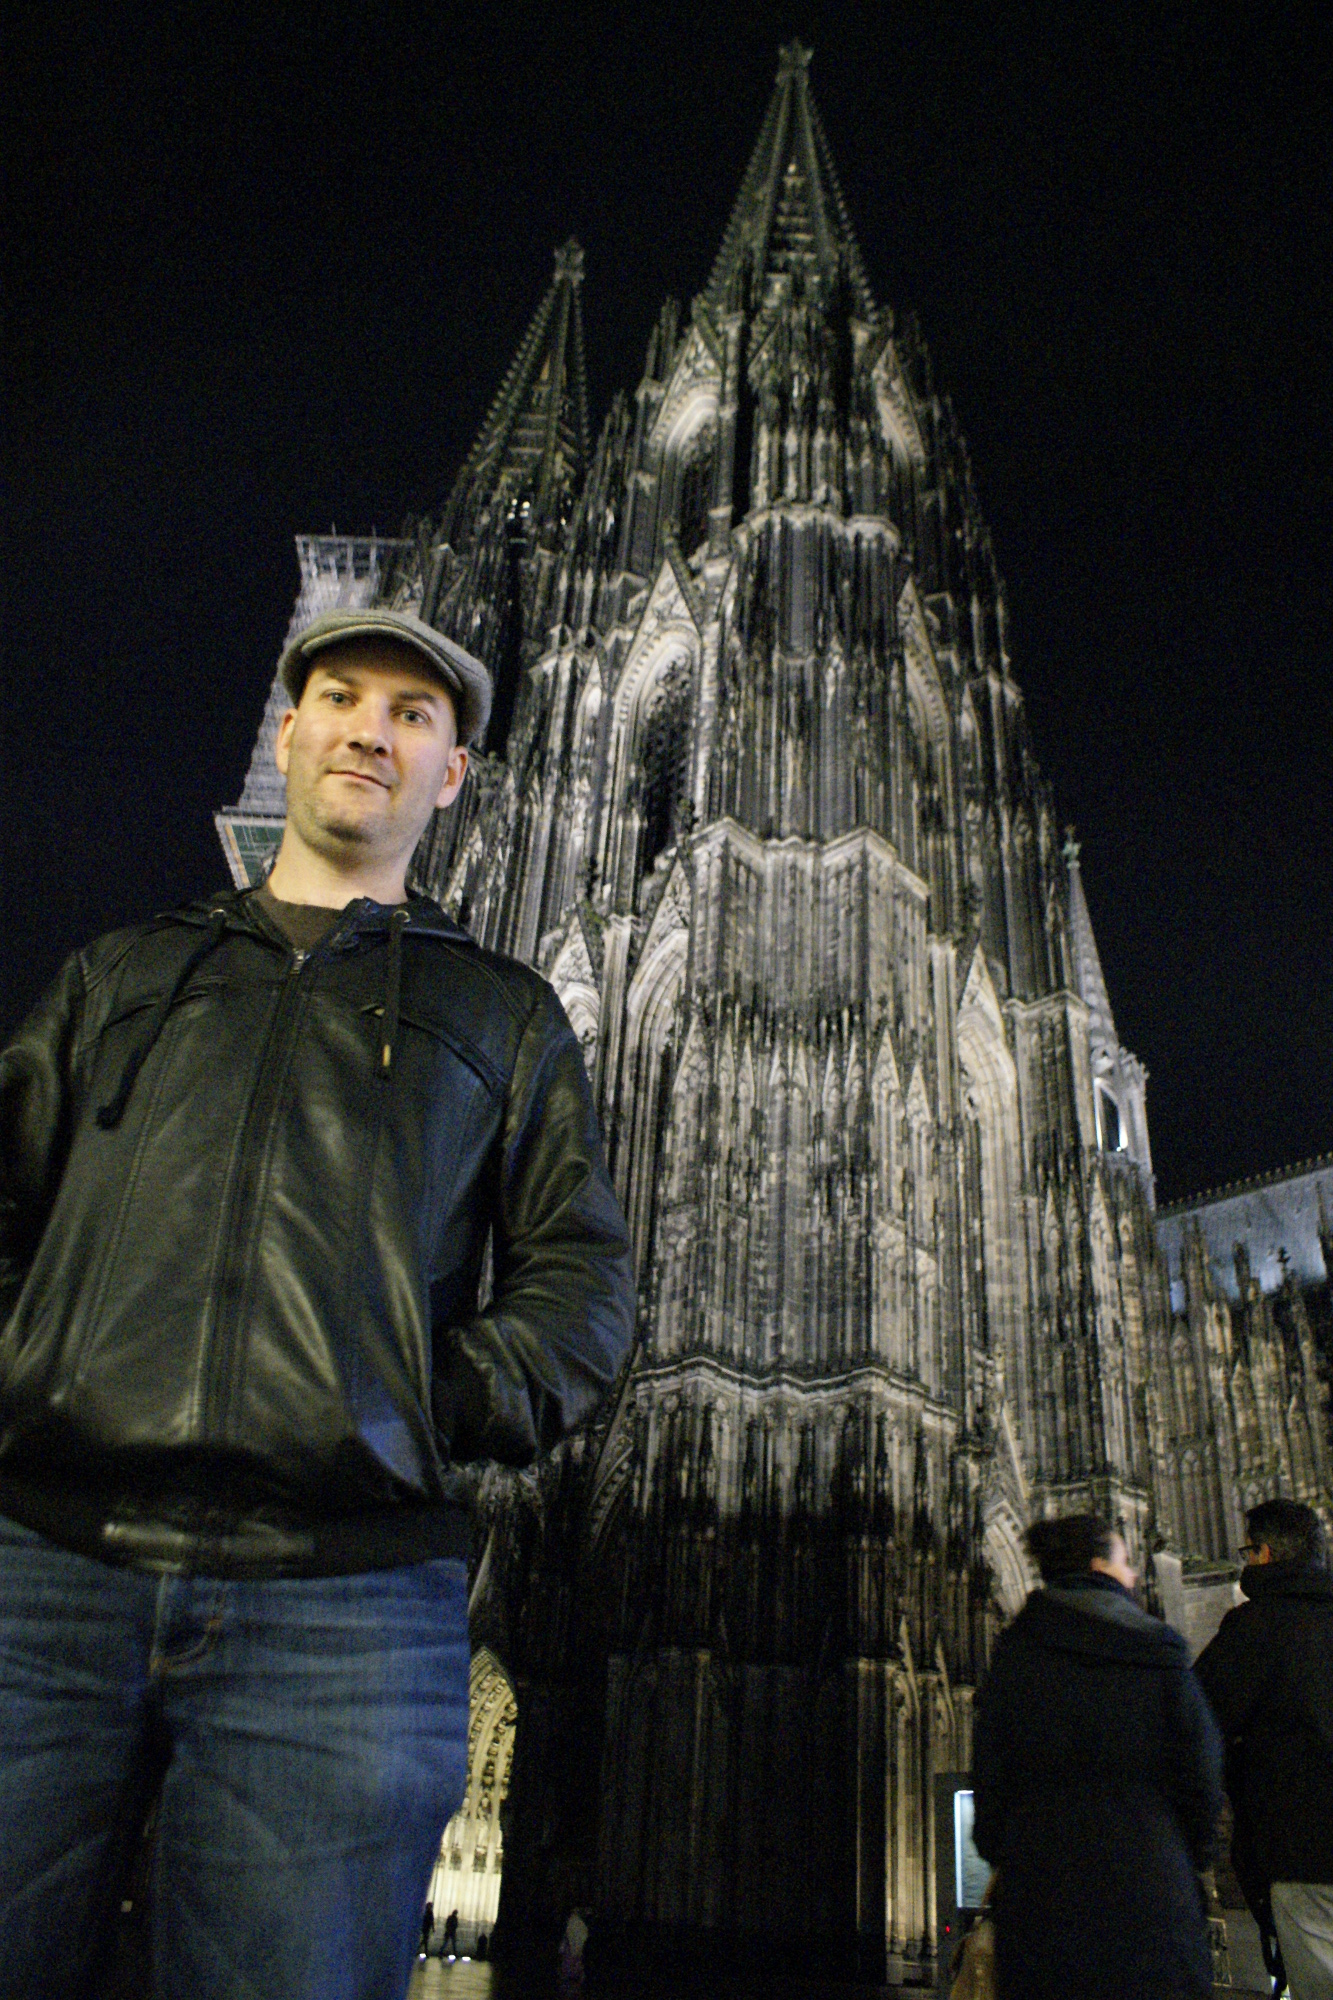 Me standing in front of the Kölner Dom